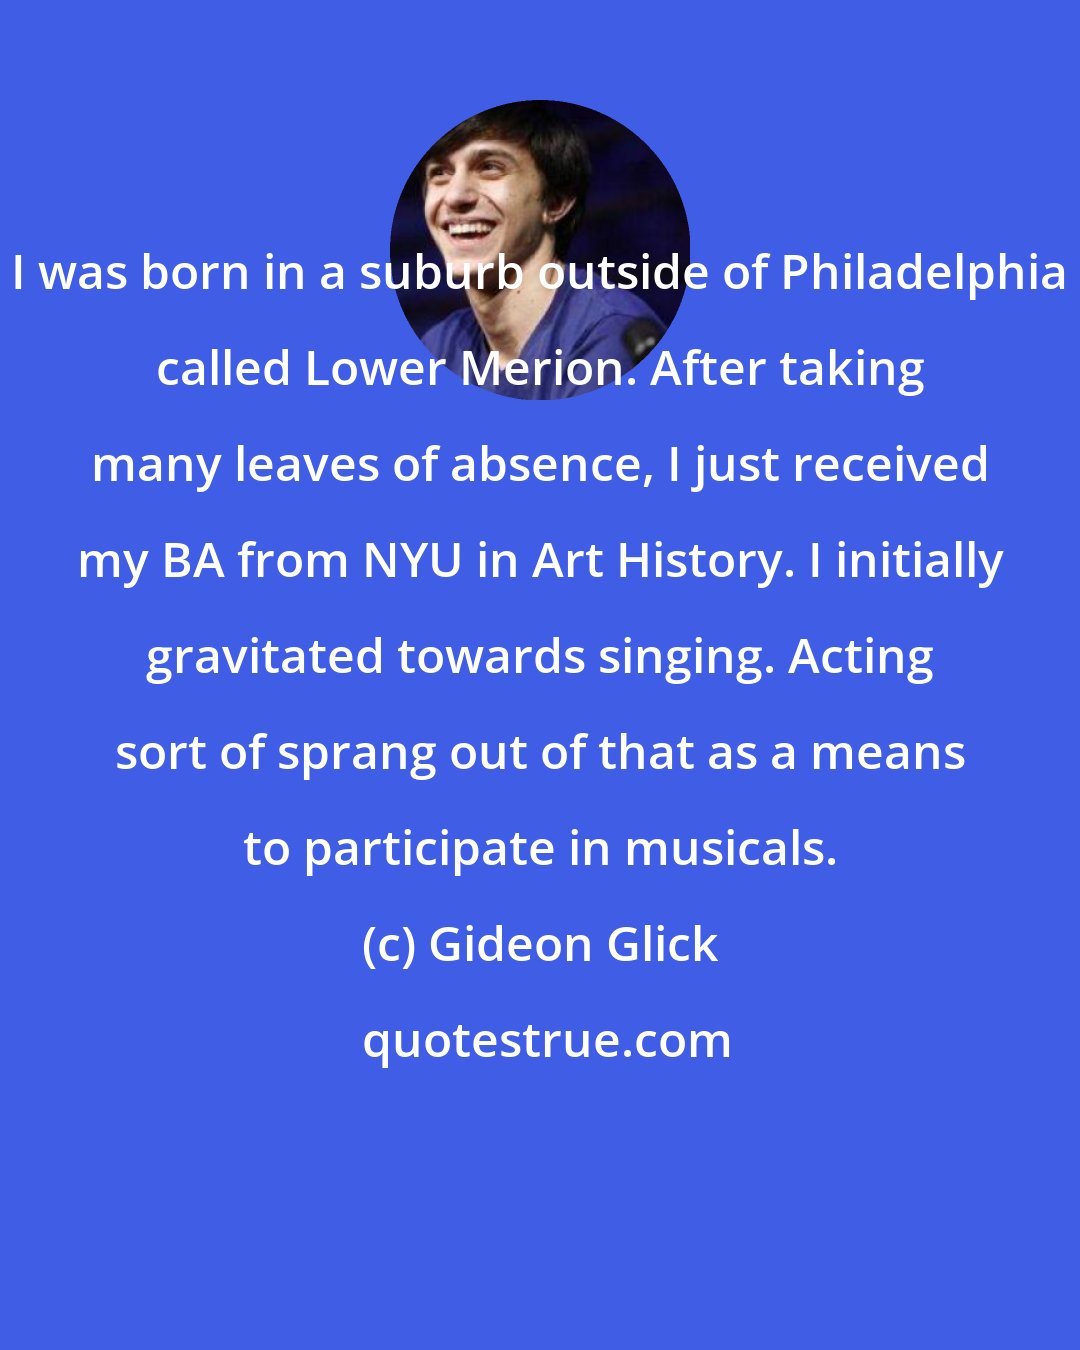 Gideon Glick: I was born in a suburb outside of Philadelphia called Lower Merion. After taking many leaves of absence, I just received my BA from NYU in Art History. I initially gravitated towards singing. Acting sort of sprang out of that as a means to participate in musicals.